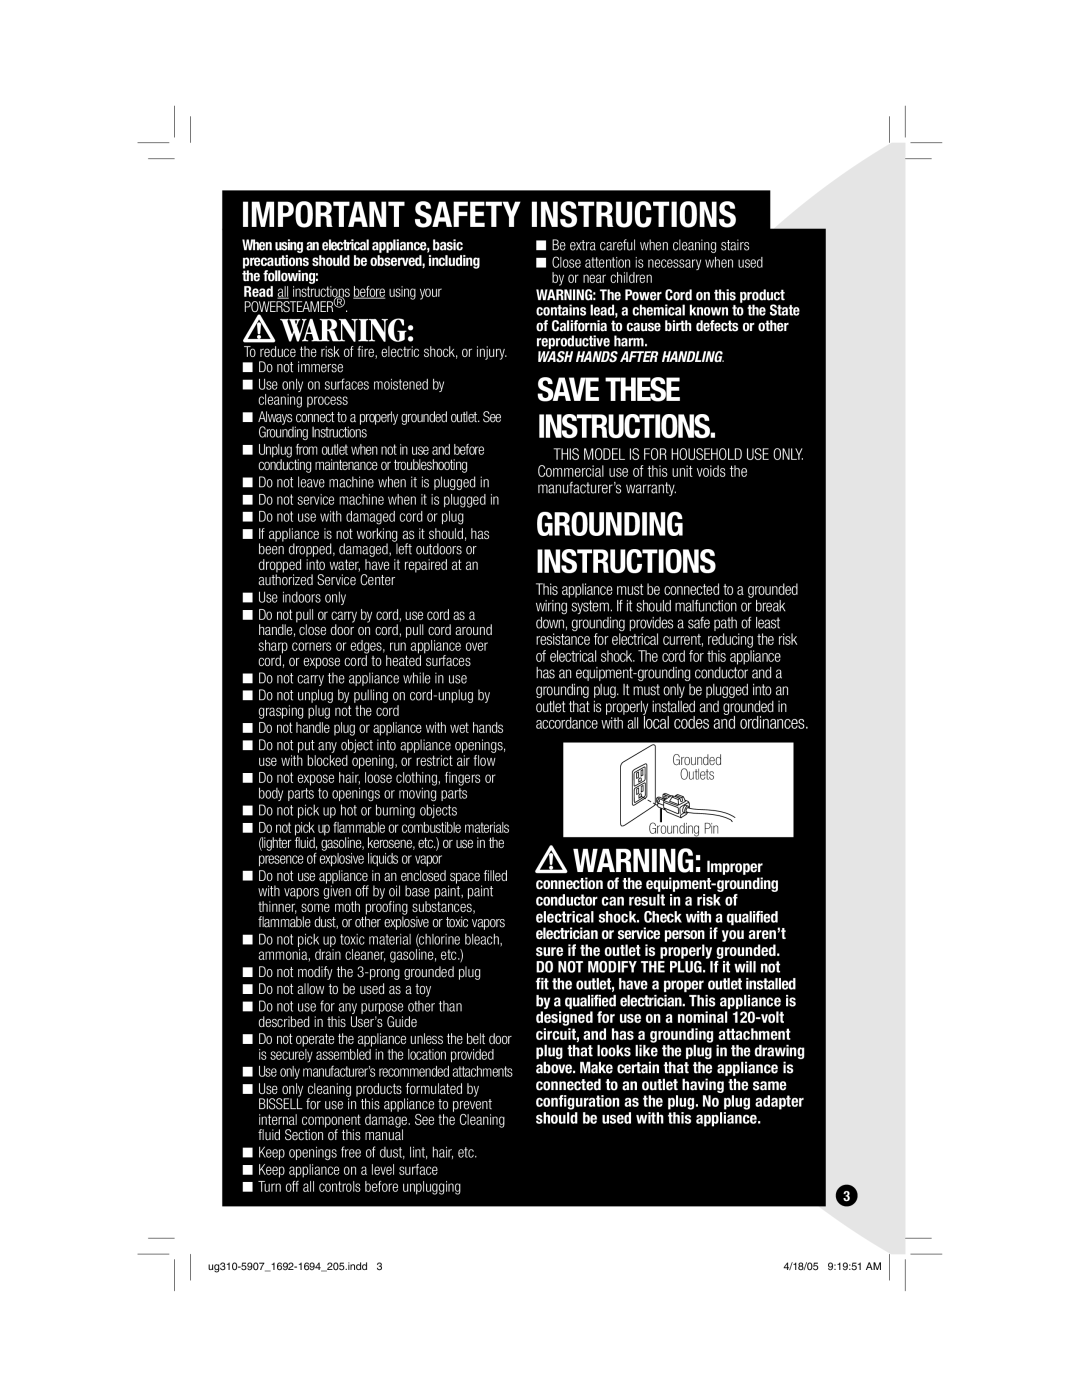 Bissell 1692, 8806, 8805 Important Safety Instructions, Save These Instructions, Grounding Instructions, WARNING Improper 